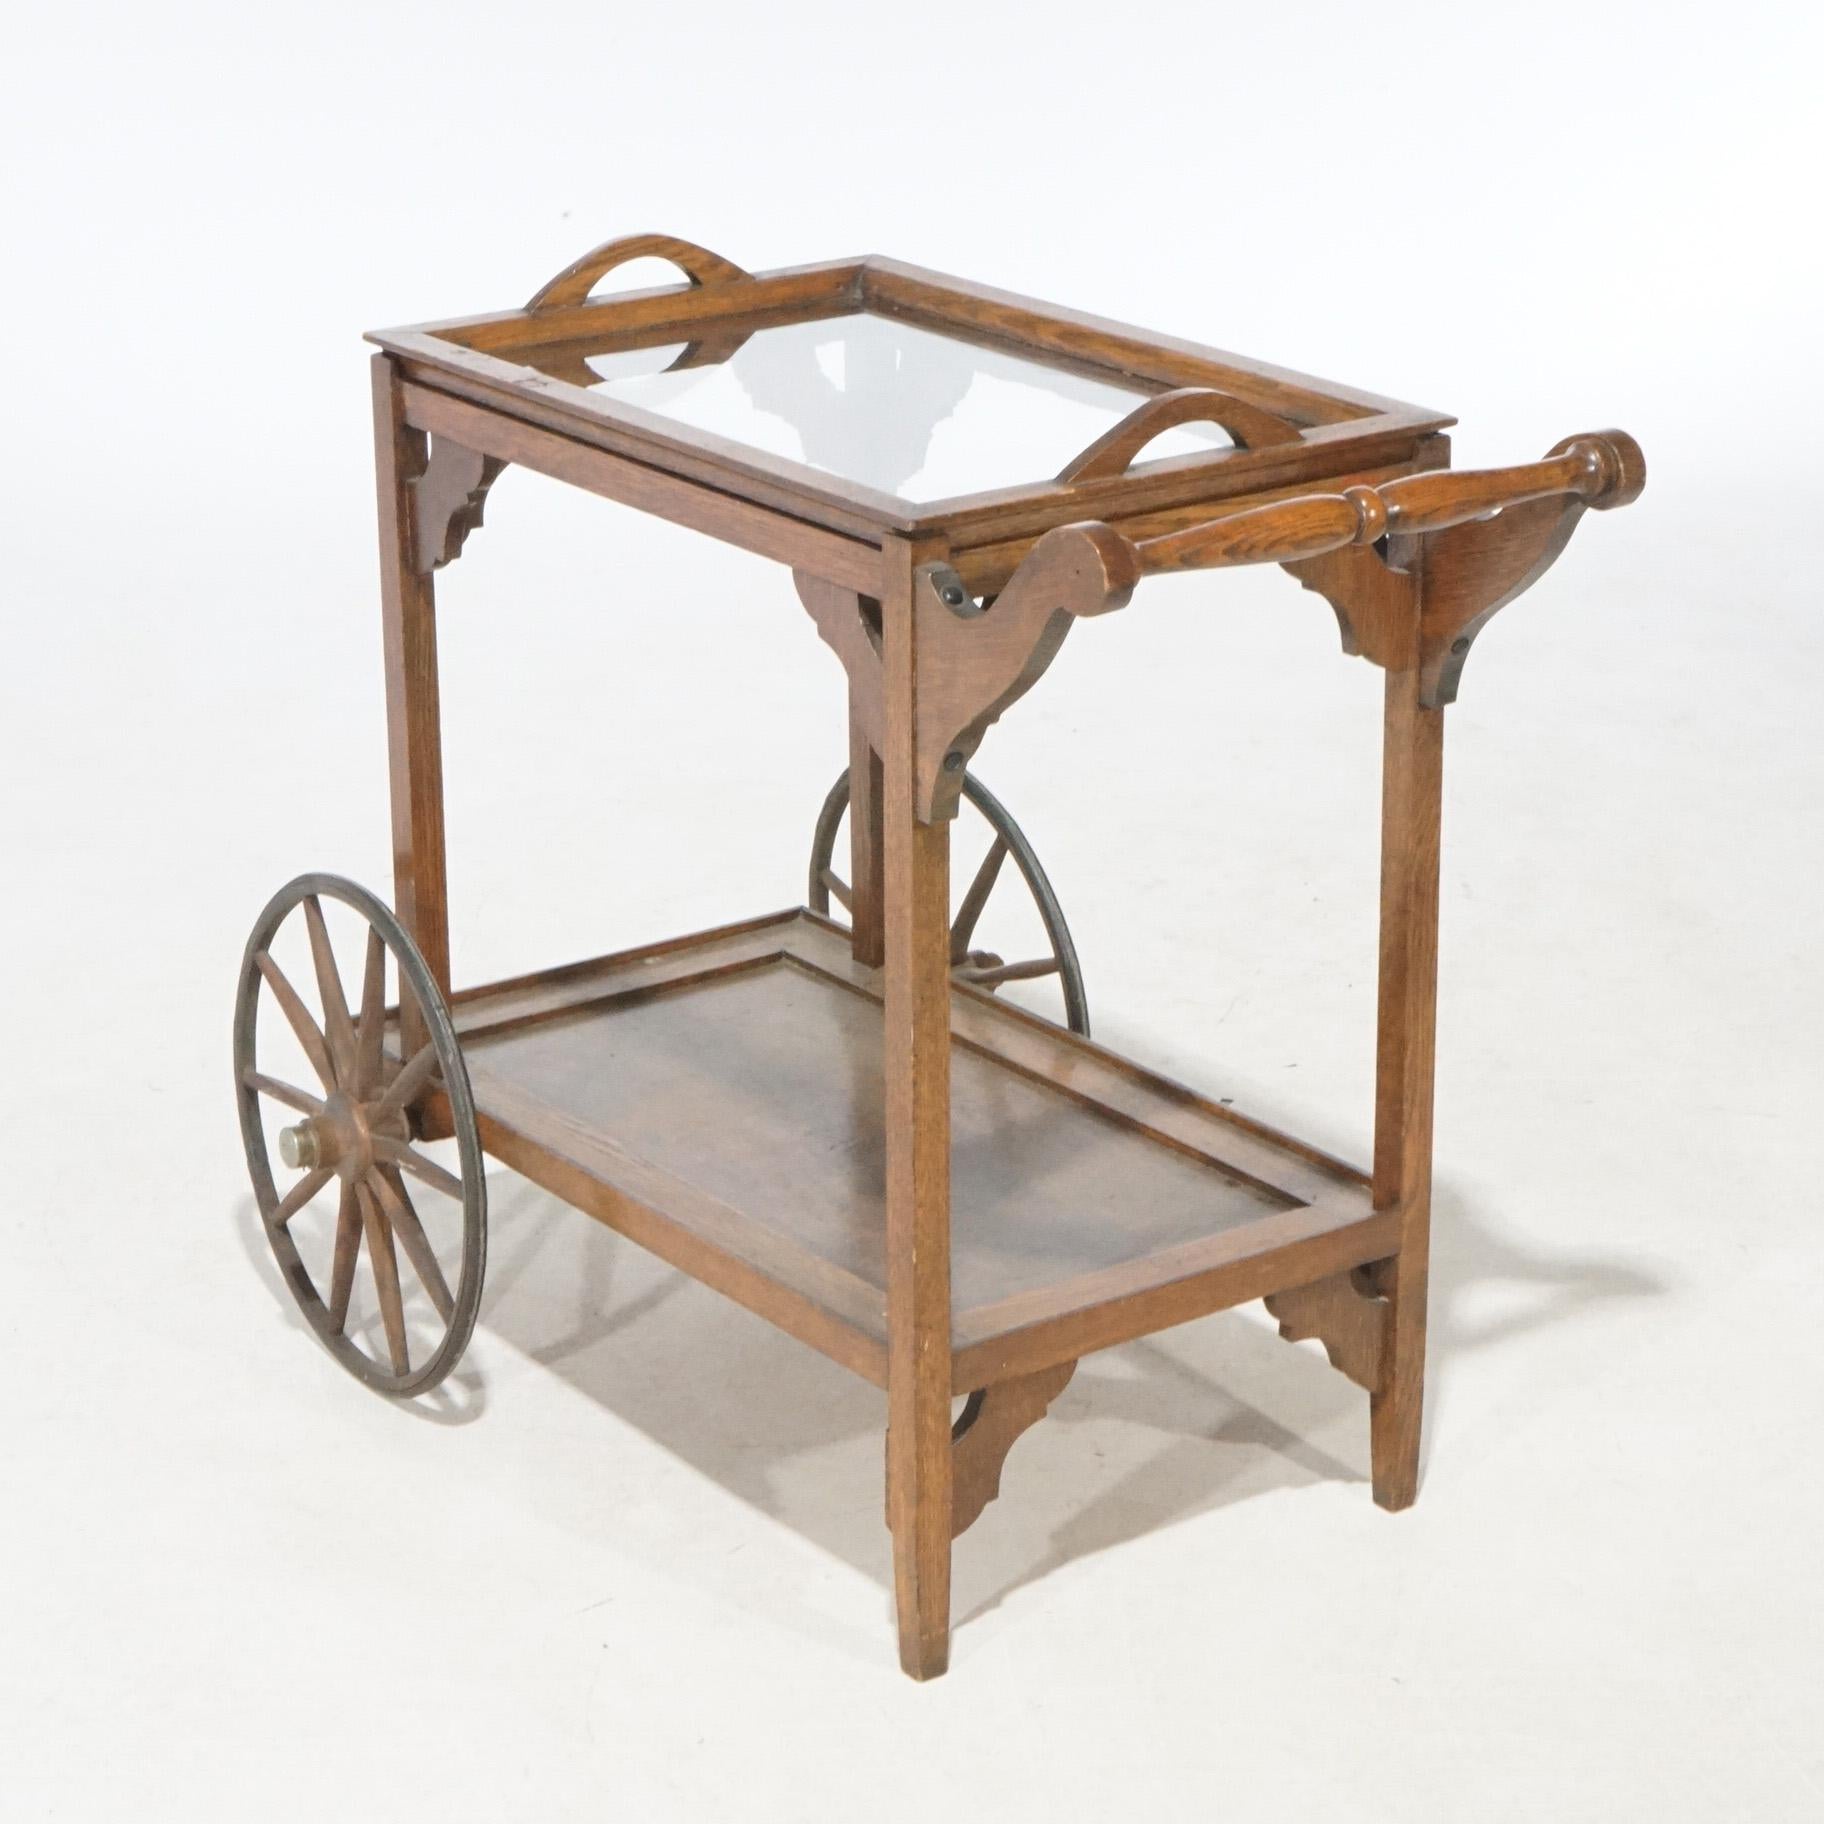 An antique Arts and Crafts tea cart offers oak construction with removeable serving tray and oversized wheels, circa 1910

Measures - 30.5